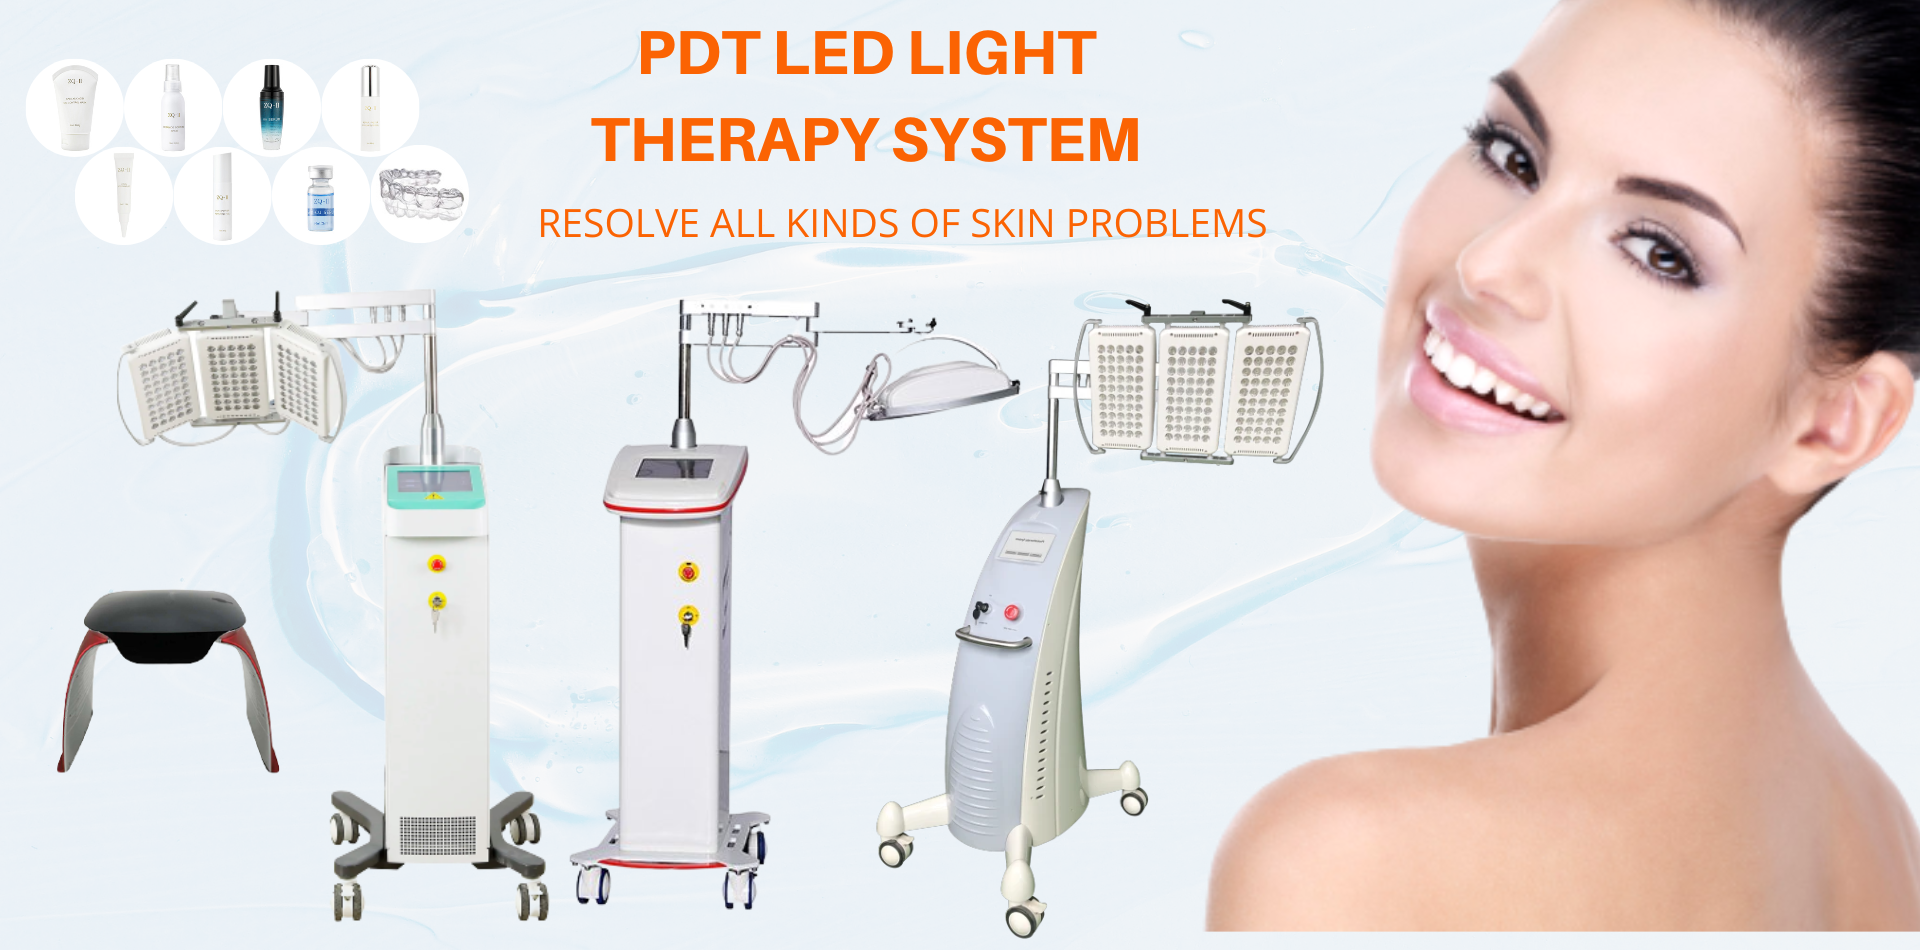 LED light therapy system